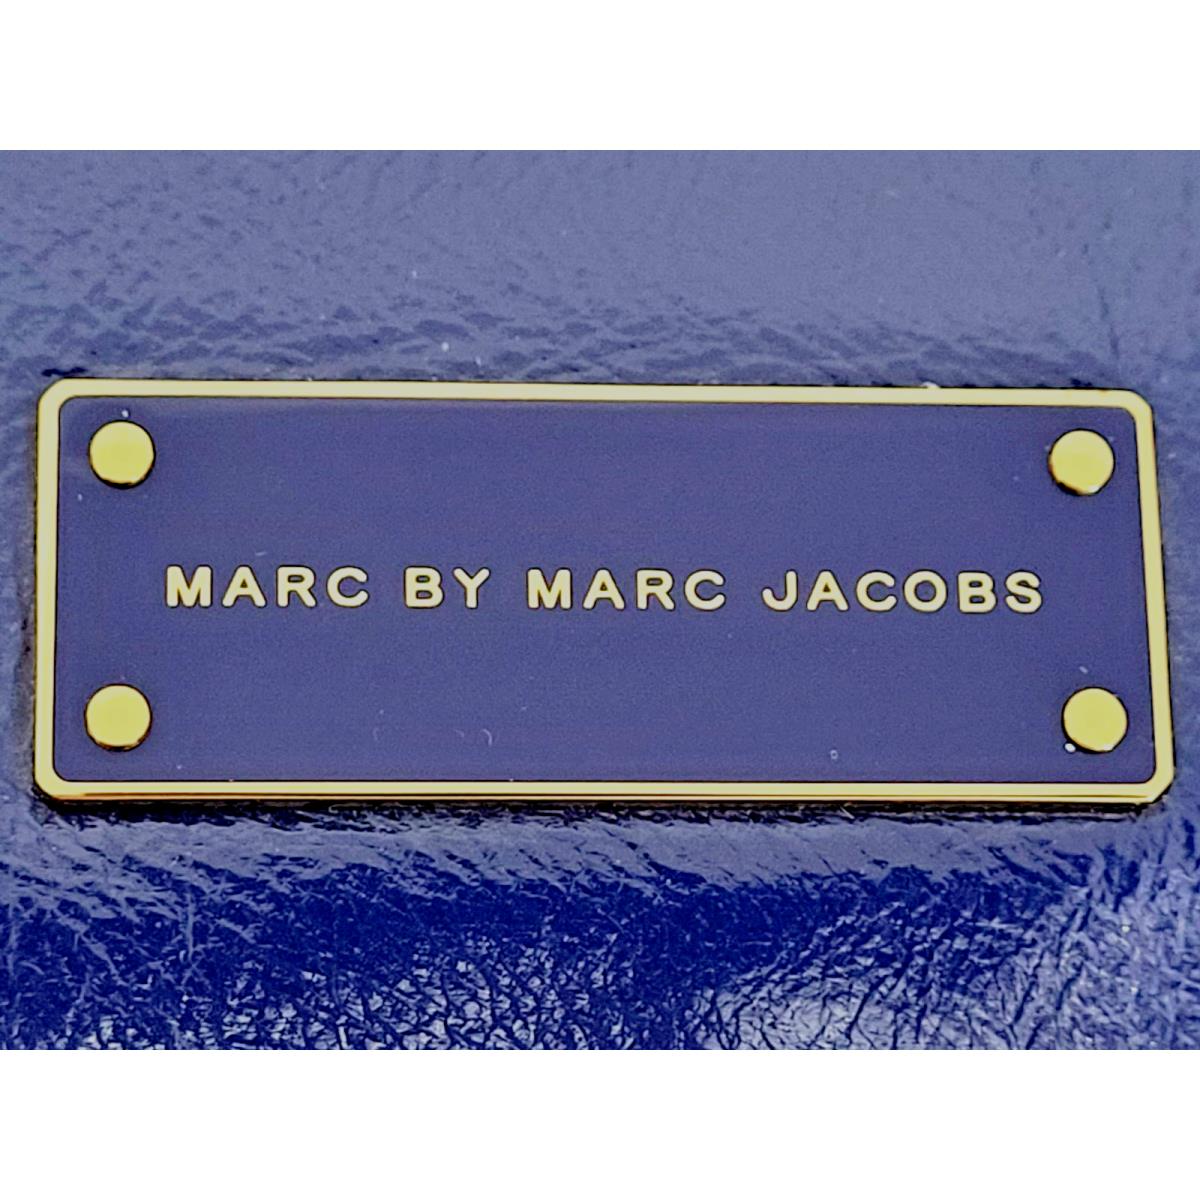 Marc Jacobs  bag  TOO HOT HANDLE - Blue Handle/Strap, Gold Hardware, BRIGHT ROYAL BLUE Exterior 9